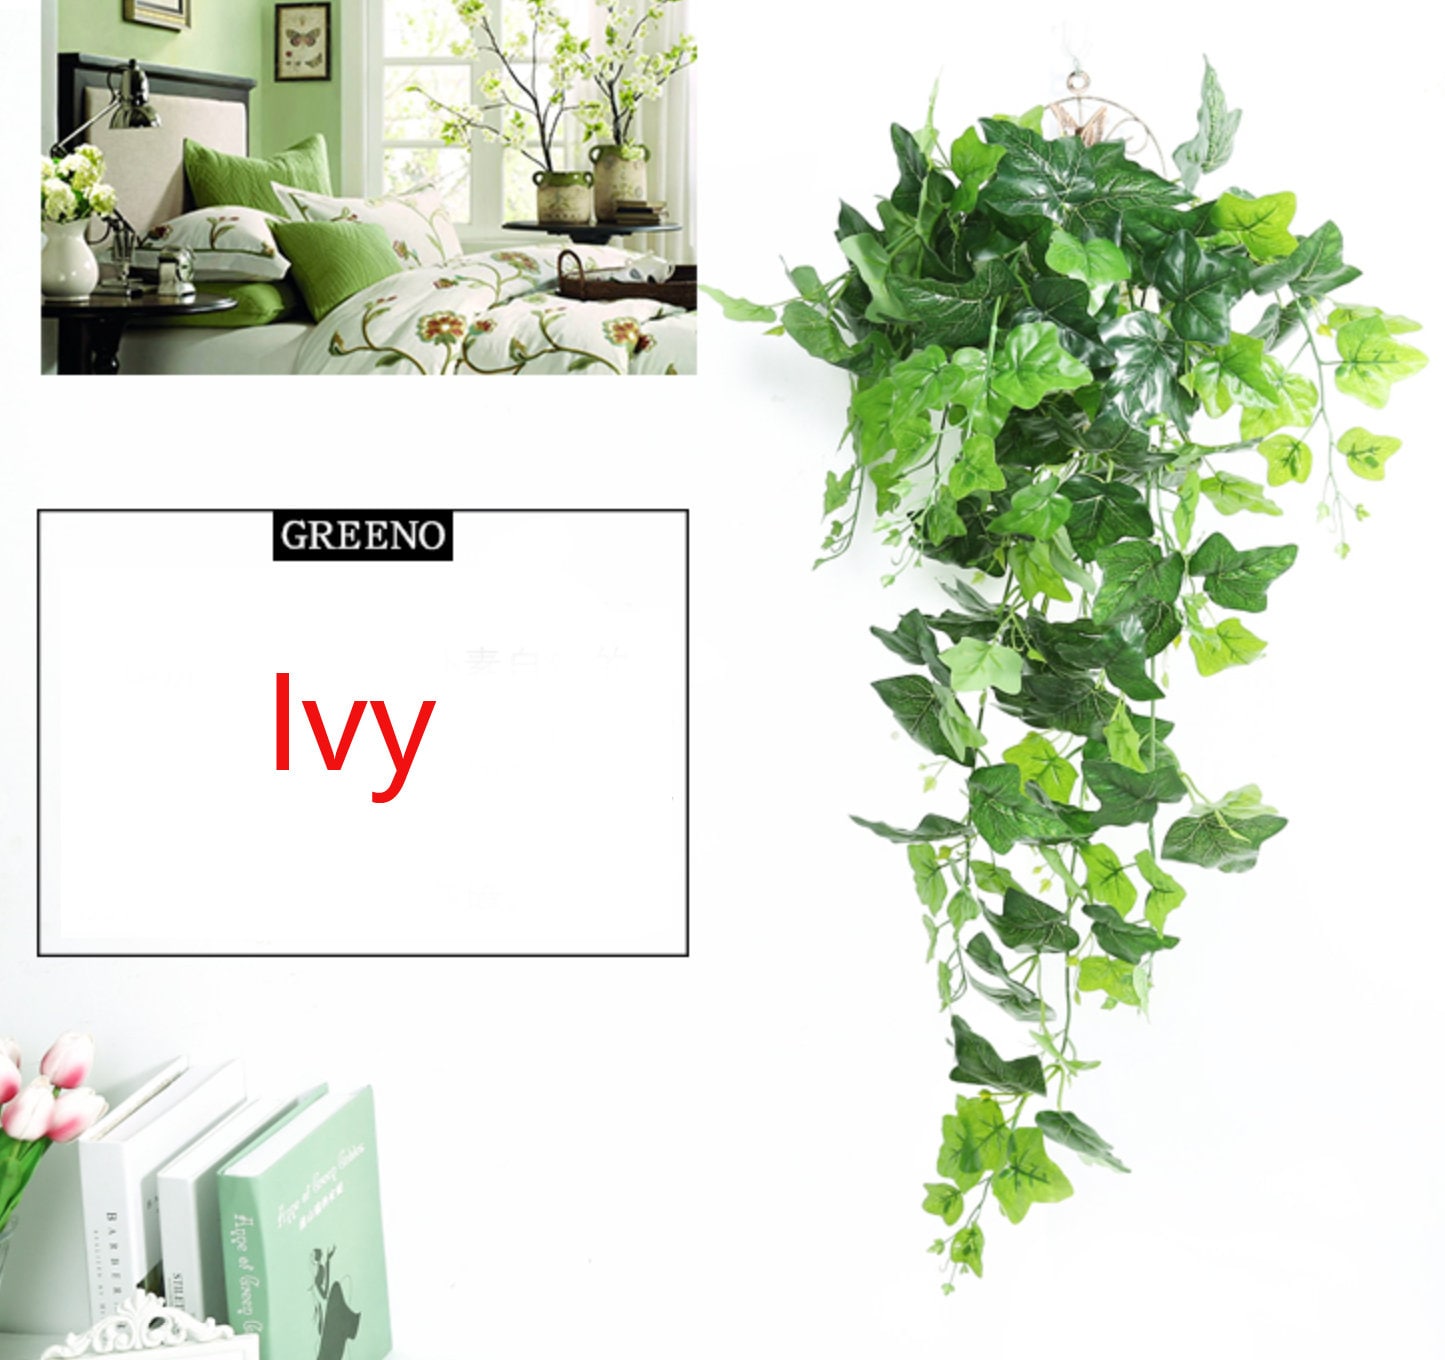 Sunjoy Tech Artificial Wall Hanging Plants, Artificial Ivy Osier Rattans  Fake Hanging Vine Plants Decor Plastic Bracketplant Greenery for Home Wall